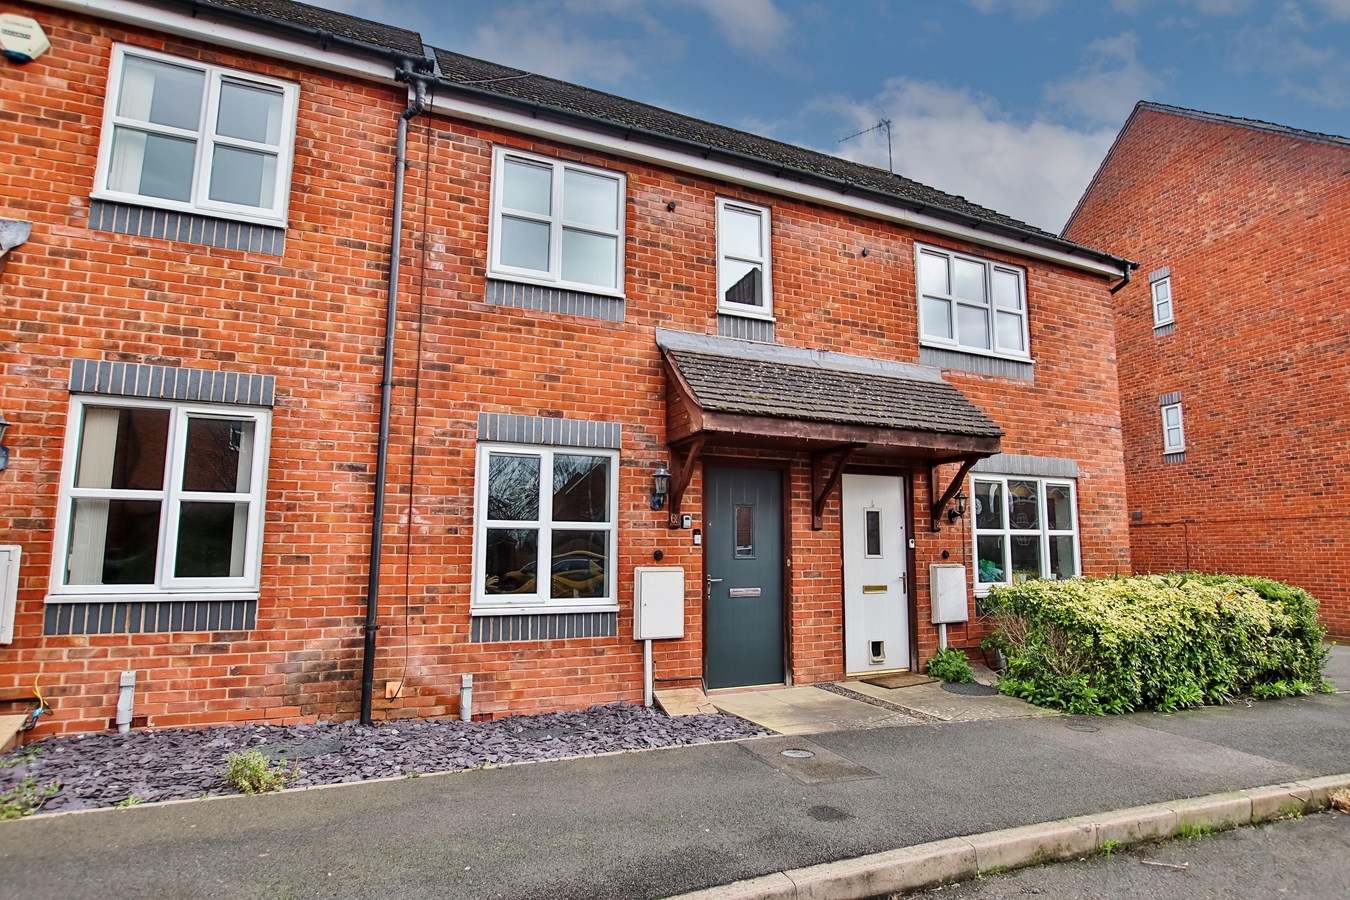 Hipkiss Gardens, Droitwich, WR9